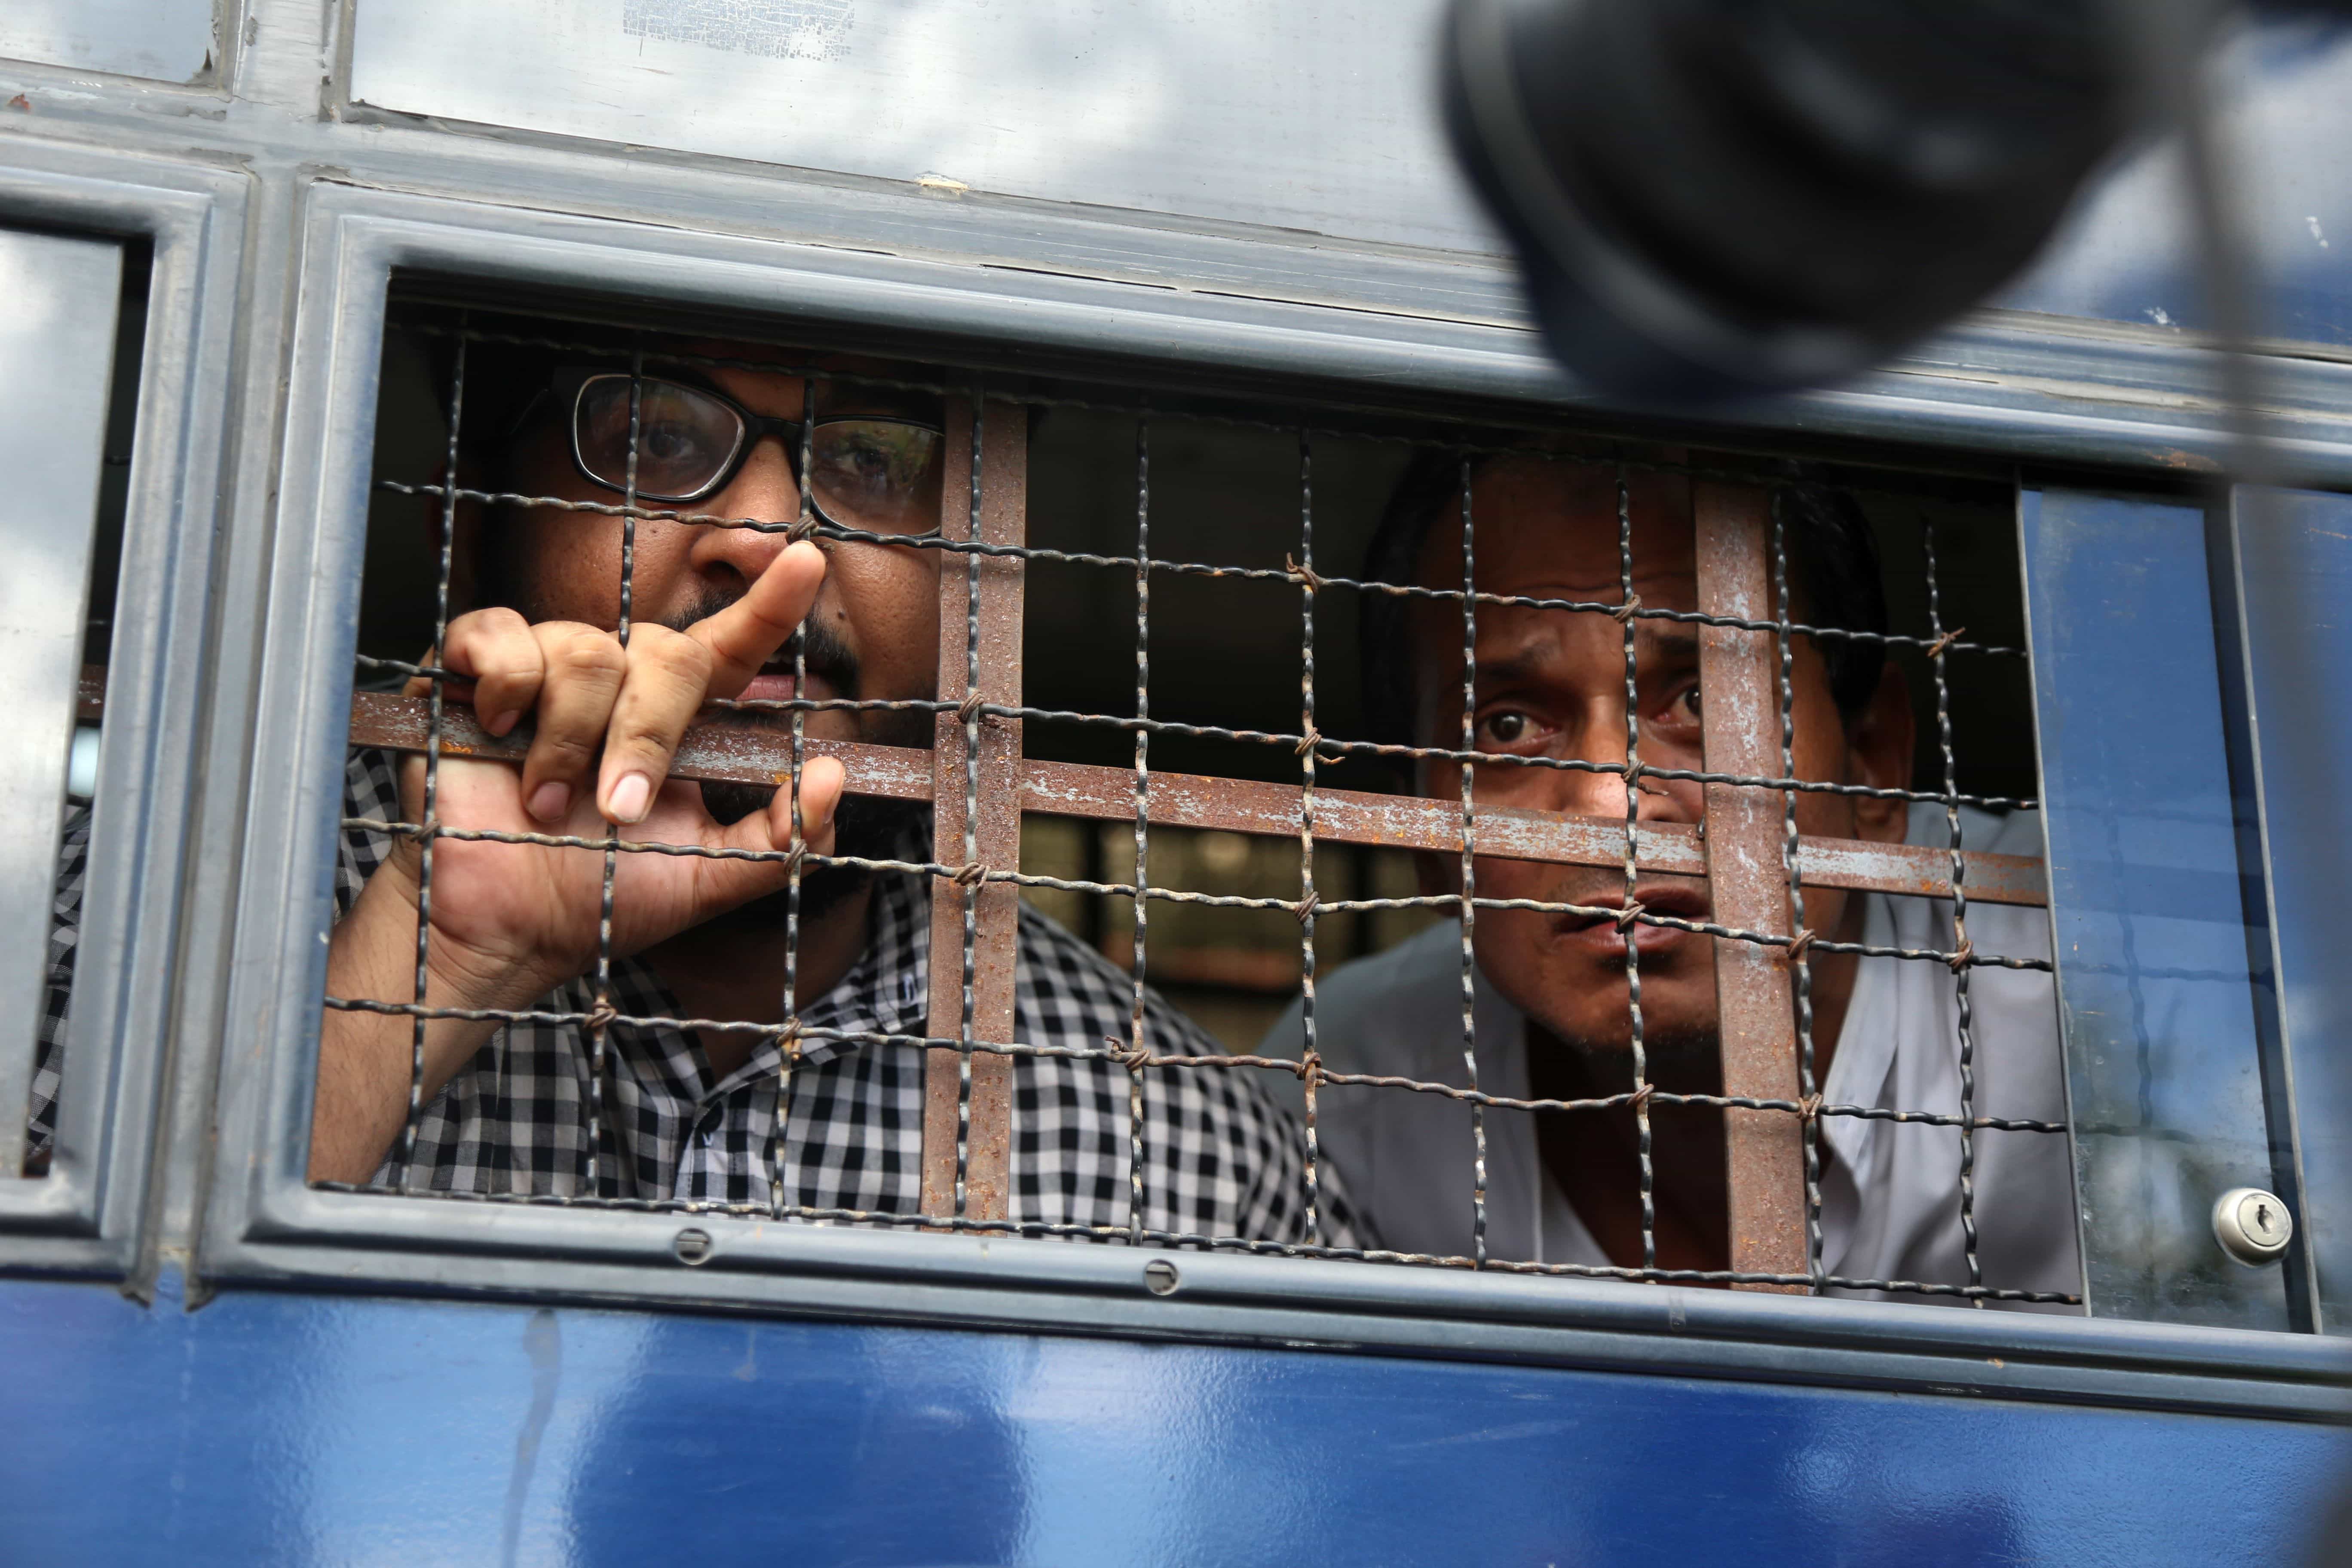 Burmese journalist Aung Naing Soe (L) and driver Hla Tin look out from a prison transport vehicle after being sentenced in November, AUNG HTET/AFP/Getty Images